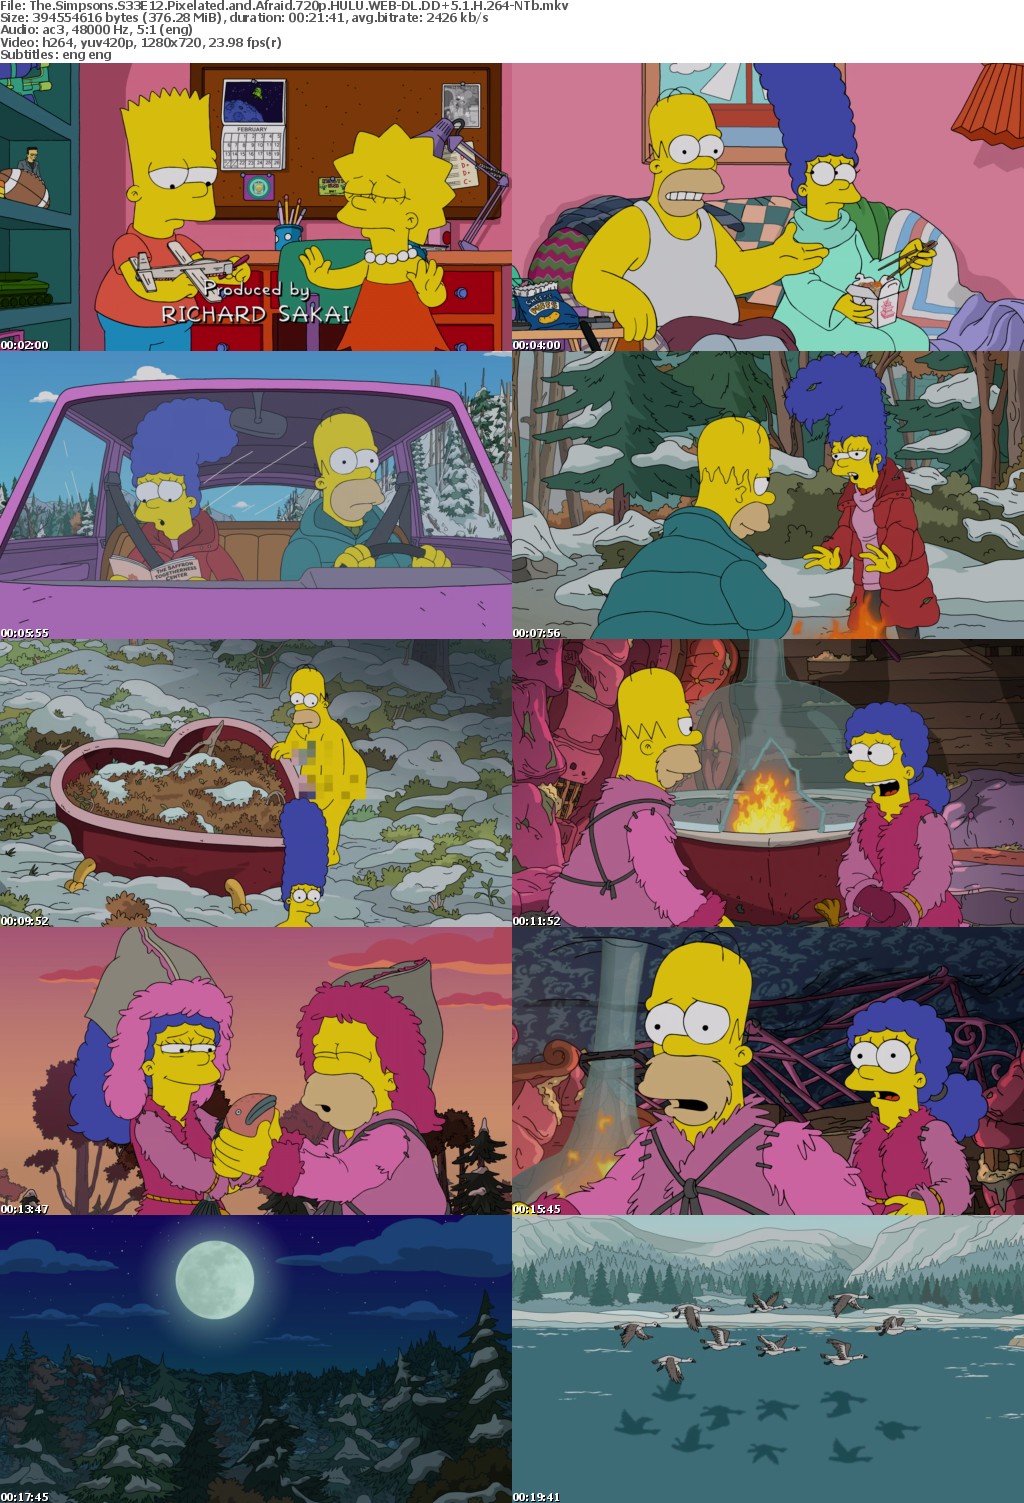 The Simpsons S33E12 Pixelated and Afraid 720p HULU WEBRip DDP5 1 x264-NTb